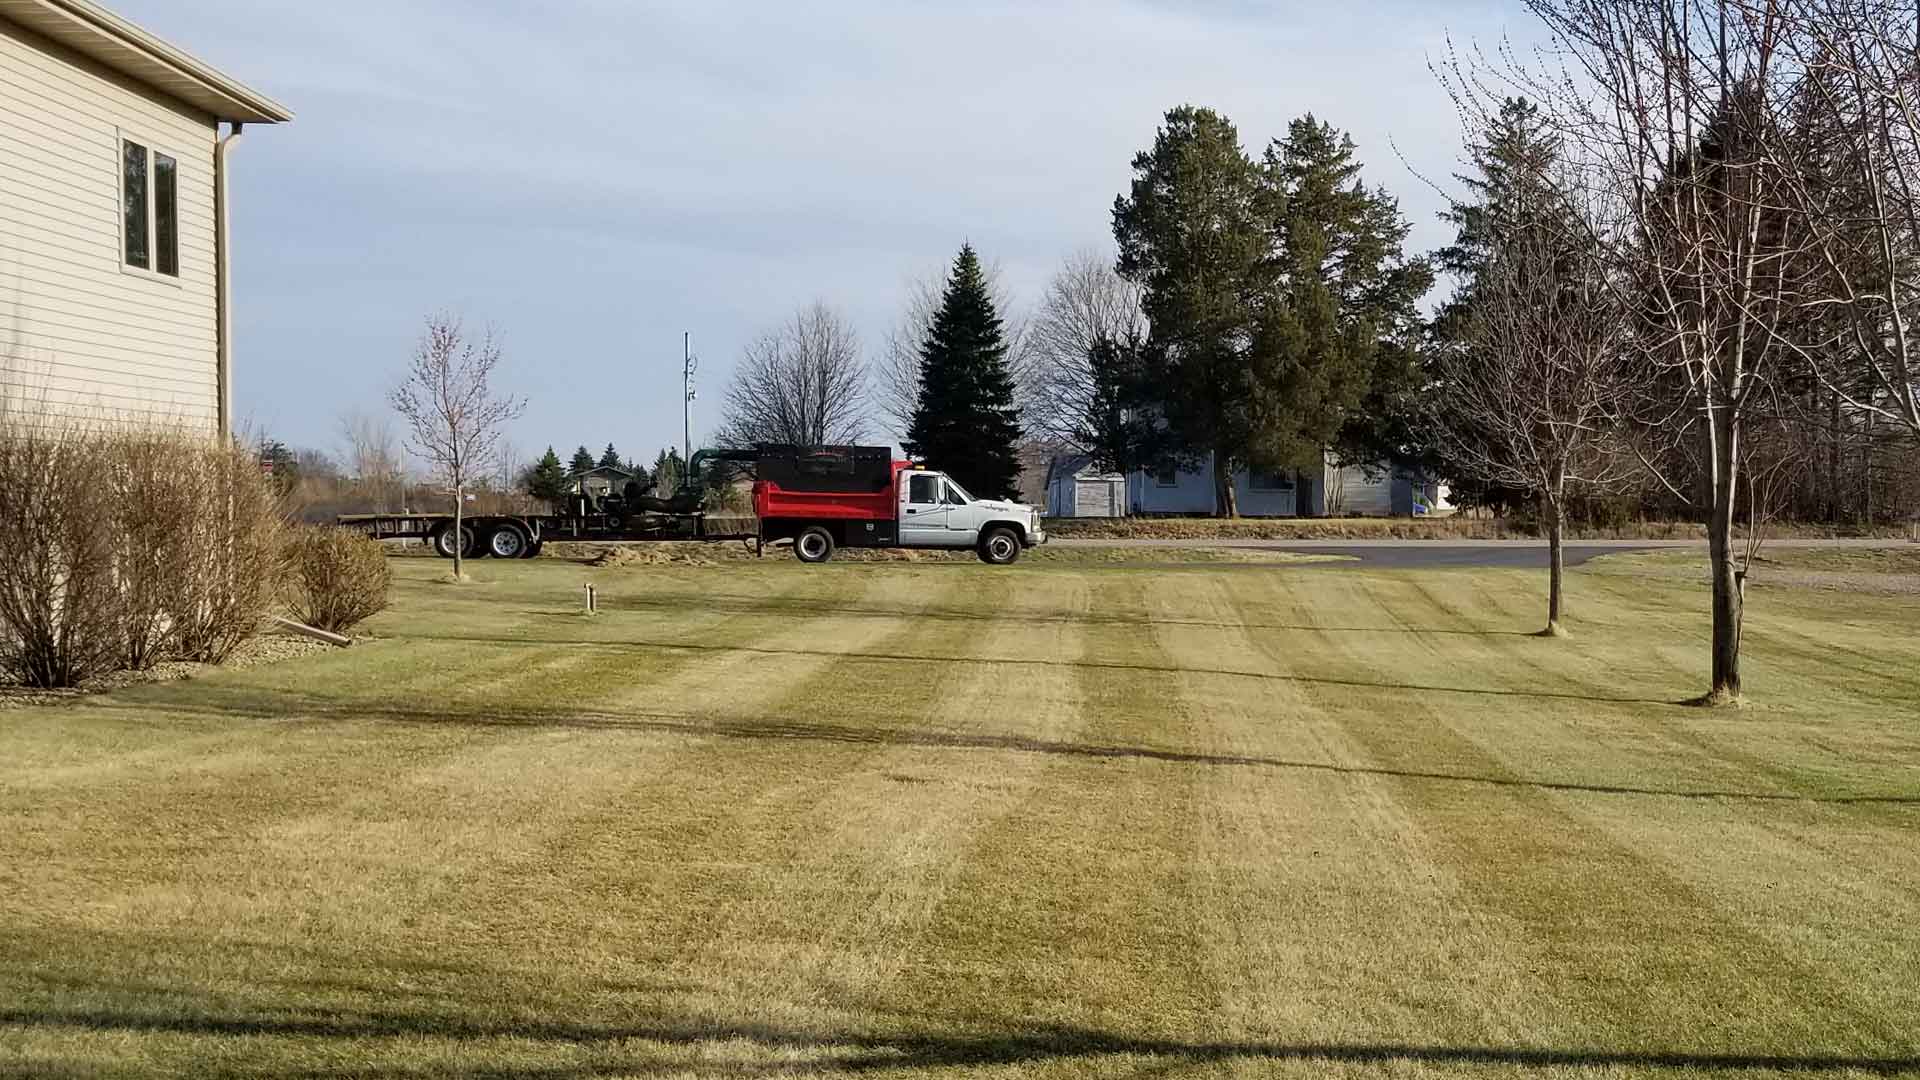 Lawn mowed with stripes.